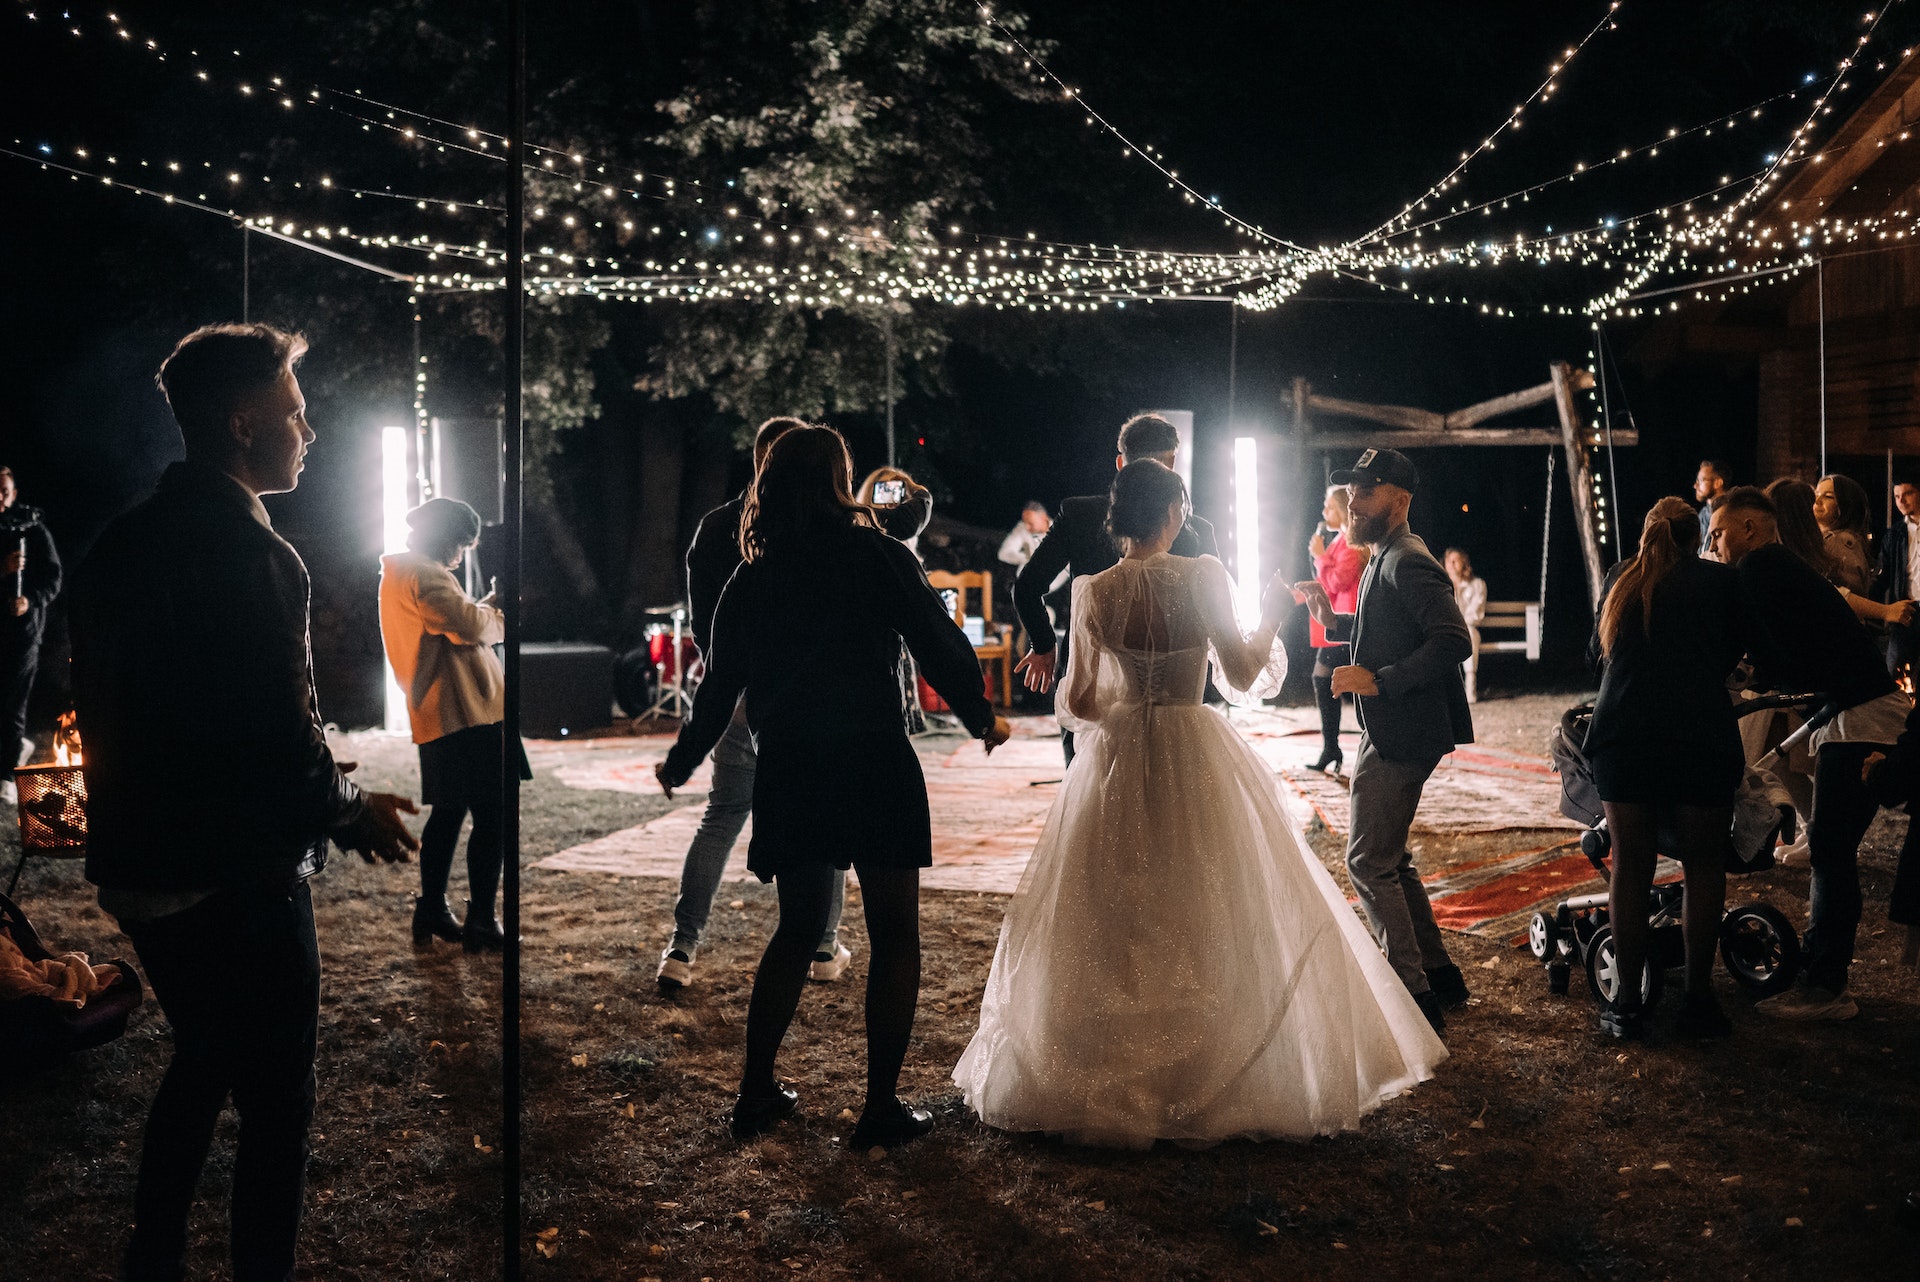 Guests dancing with the bride at her wedding | Source: Pexels